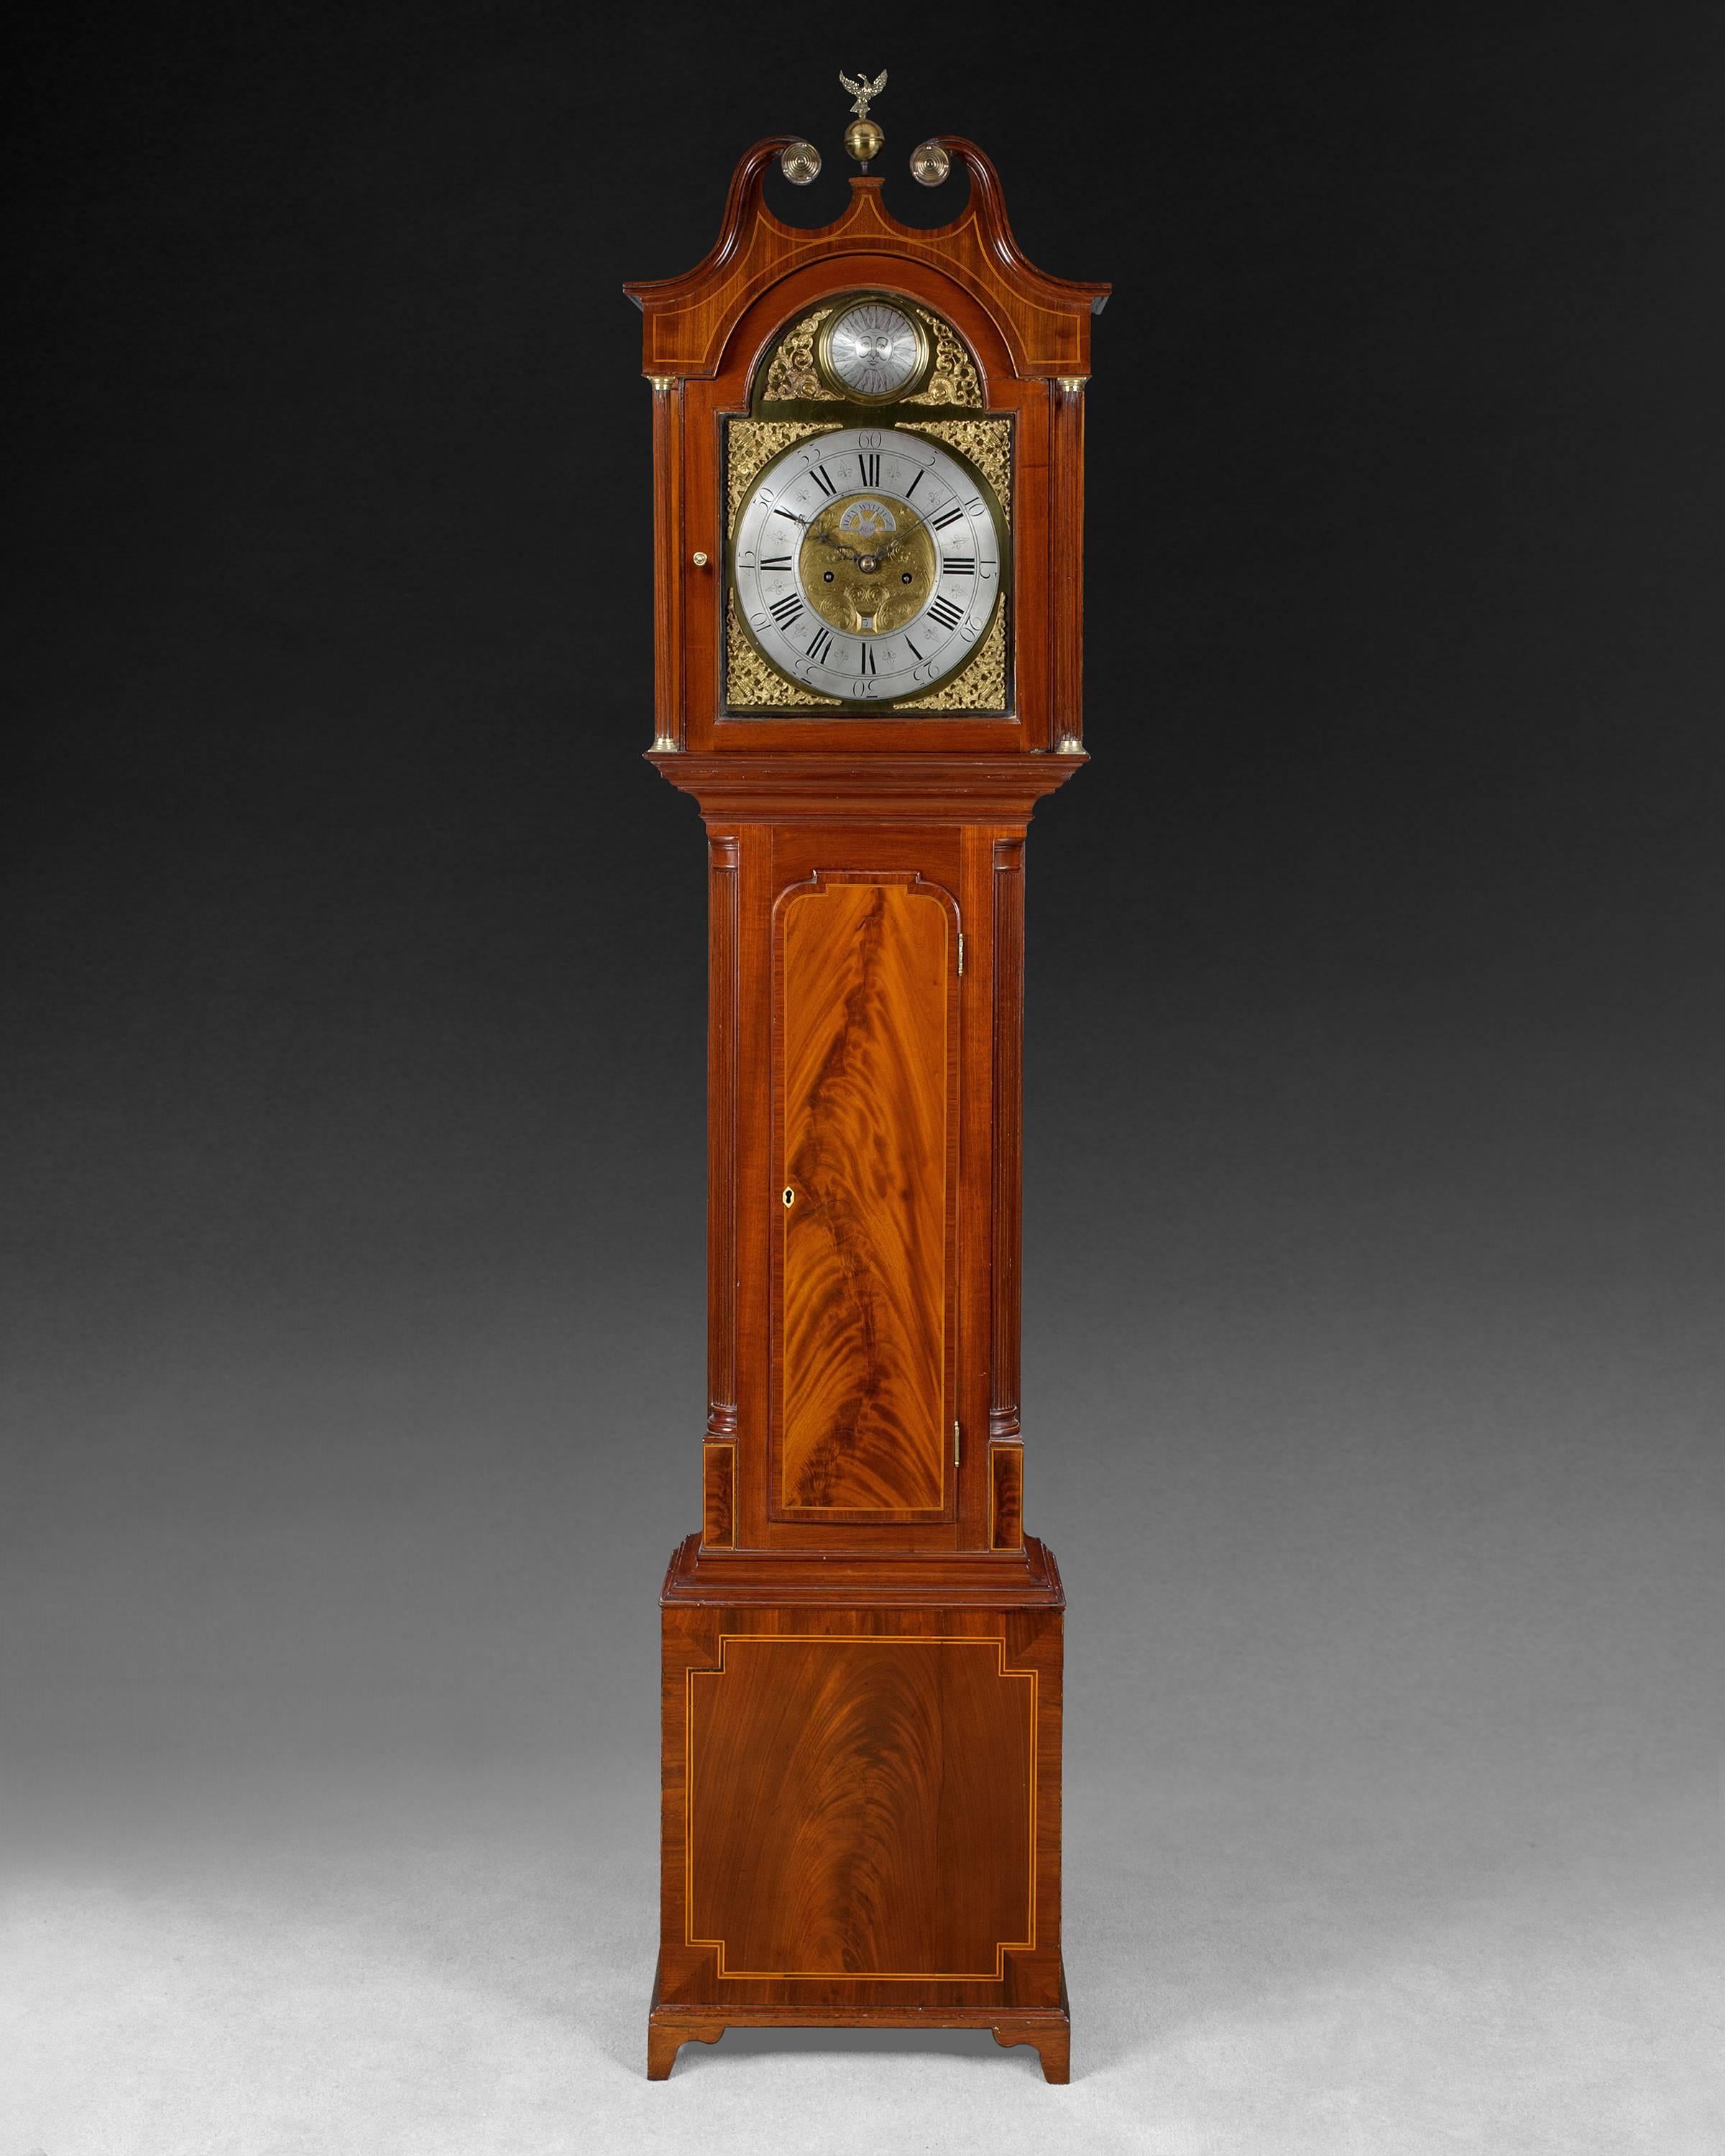 No: 404R “Alexander Wyllie Dumfries” 
A very pleasing and small George III period mahogany and inlaid Scottish longcase clock, the hood with a scrolled pediment centred by a brass eagle finial flanked by brass ringed paterae, the ebony and boxwood